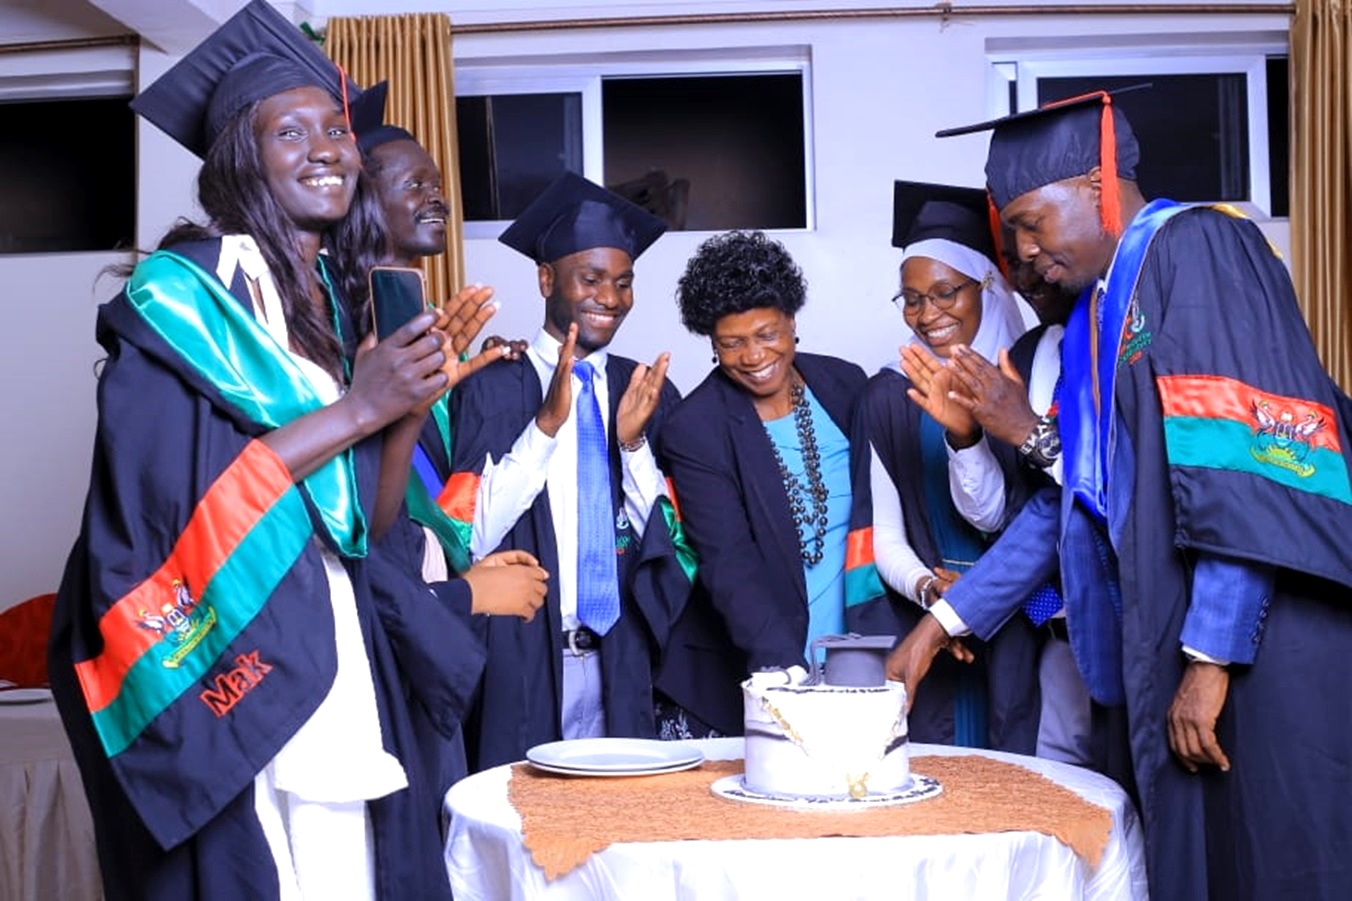 The Head, International Office at Makerere University, Ms. Martha Muwanguzi (Centre) joins a section of international graduates to cut cake during their graduation party on 25th February 2023.